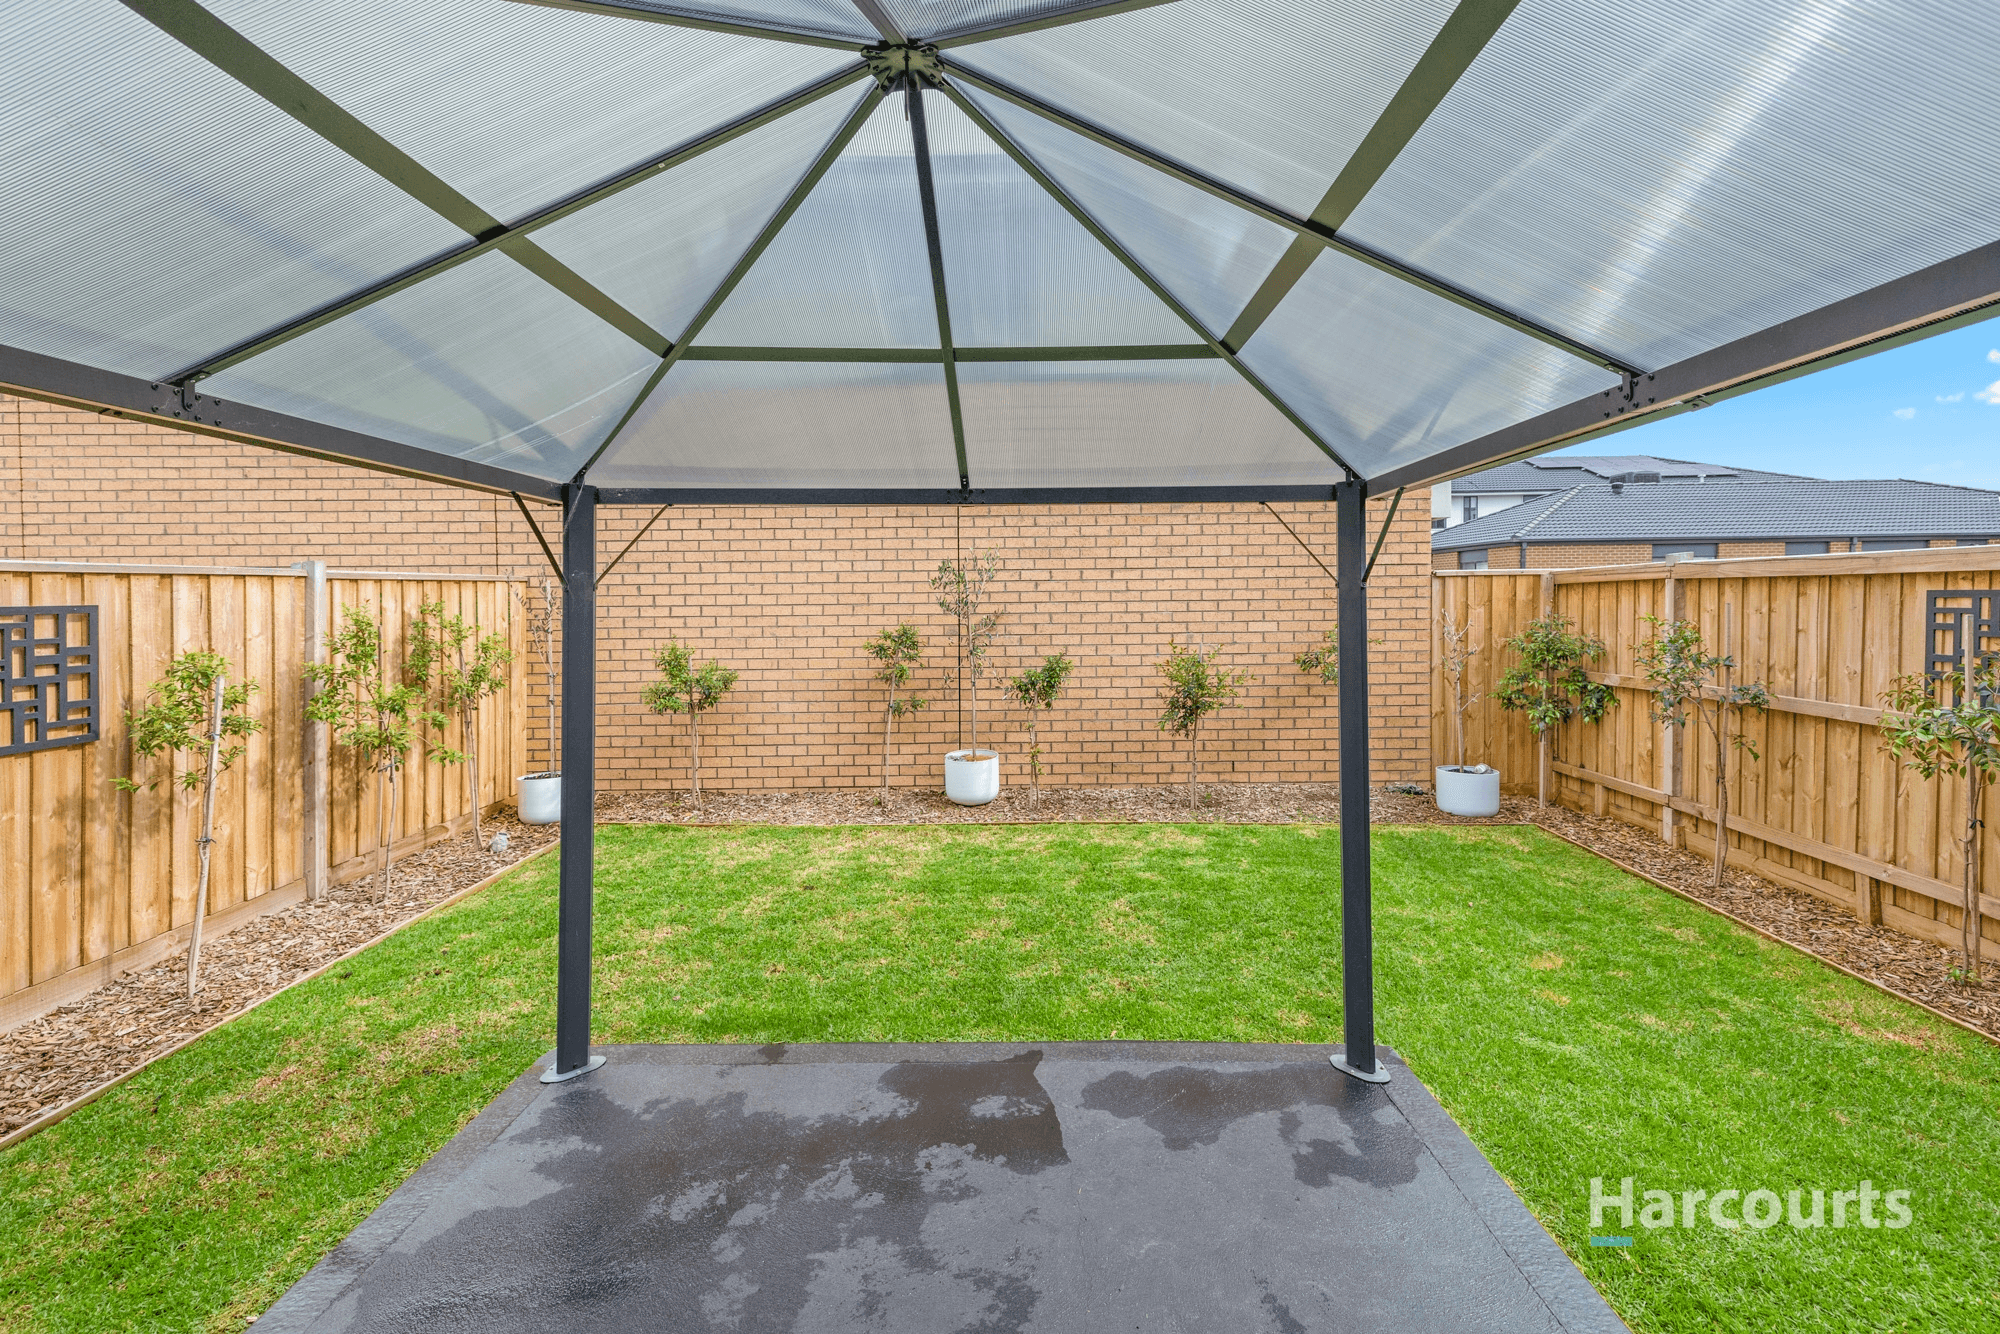 25 Gray Court, Deanside, VIC 3336